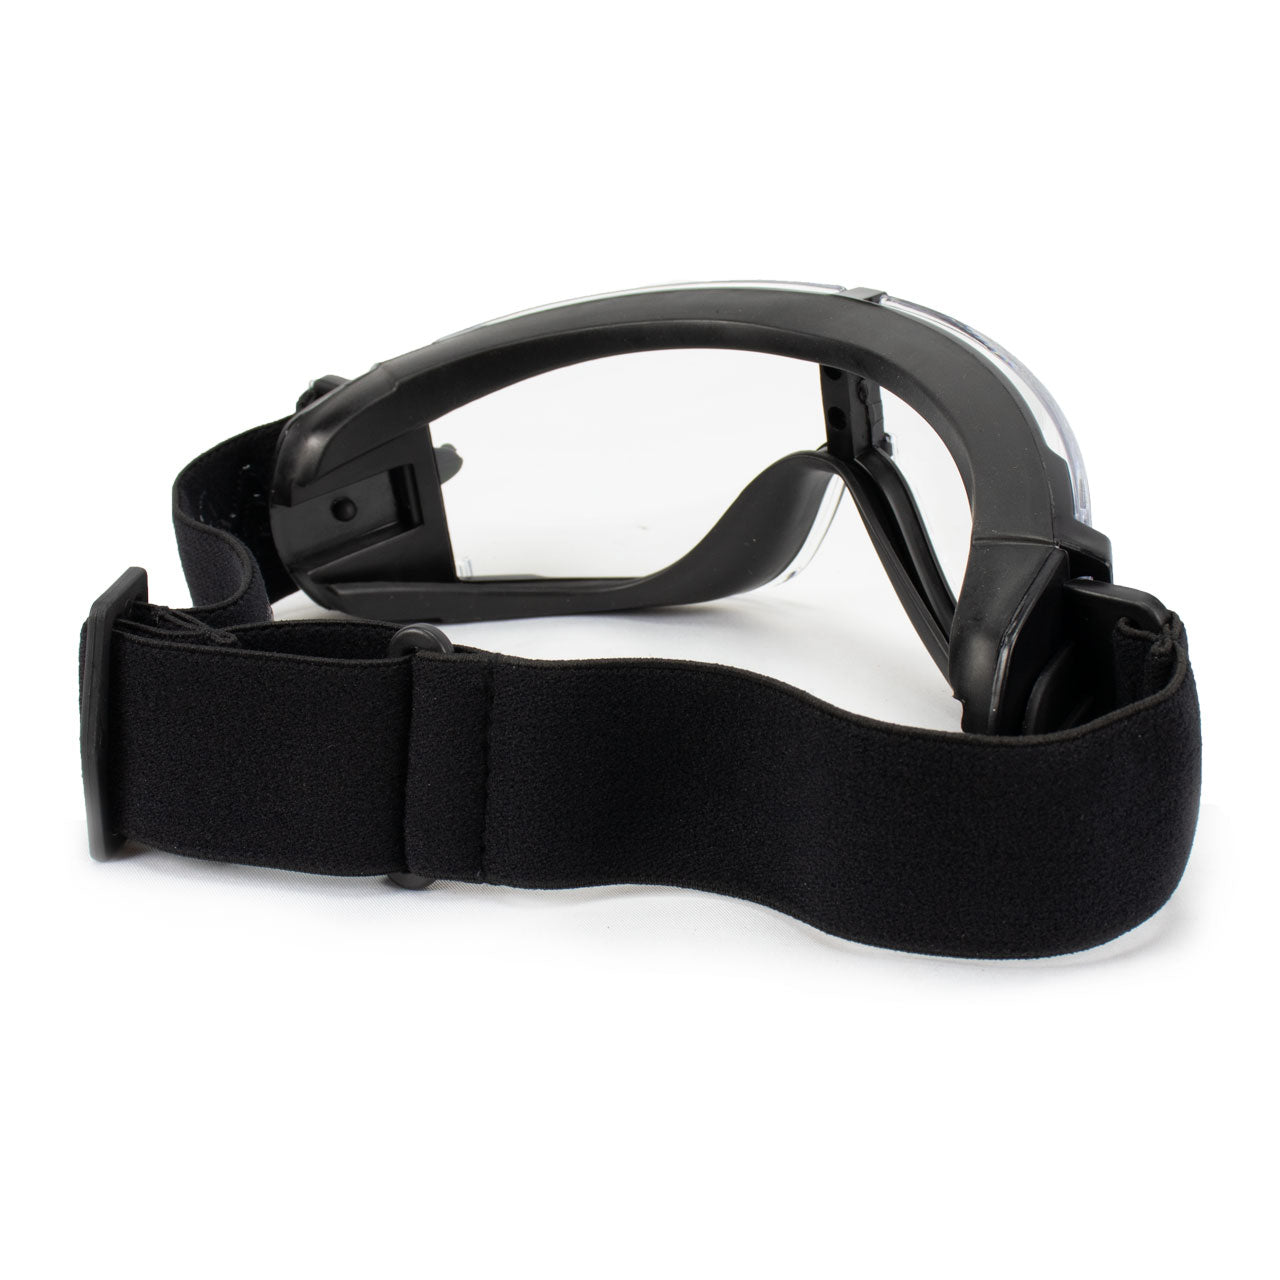 X800 Tactical Shooting Goggle with Pouch 1 lens